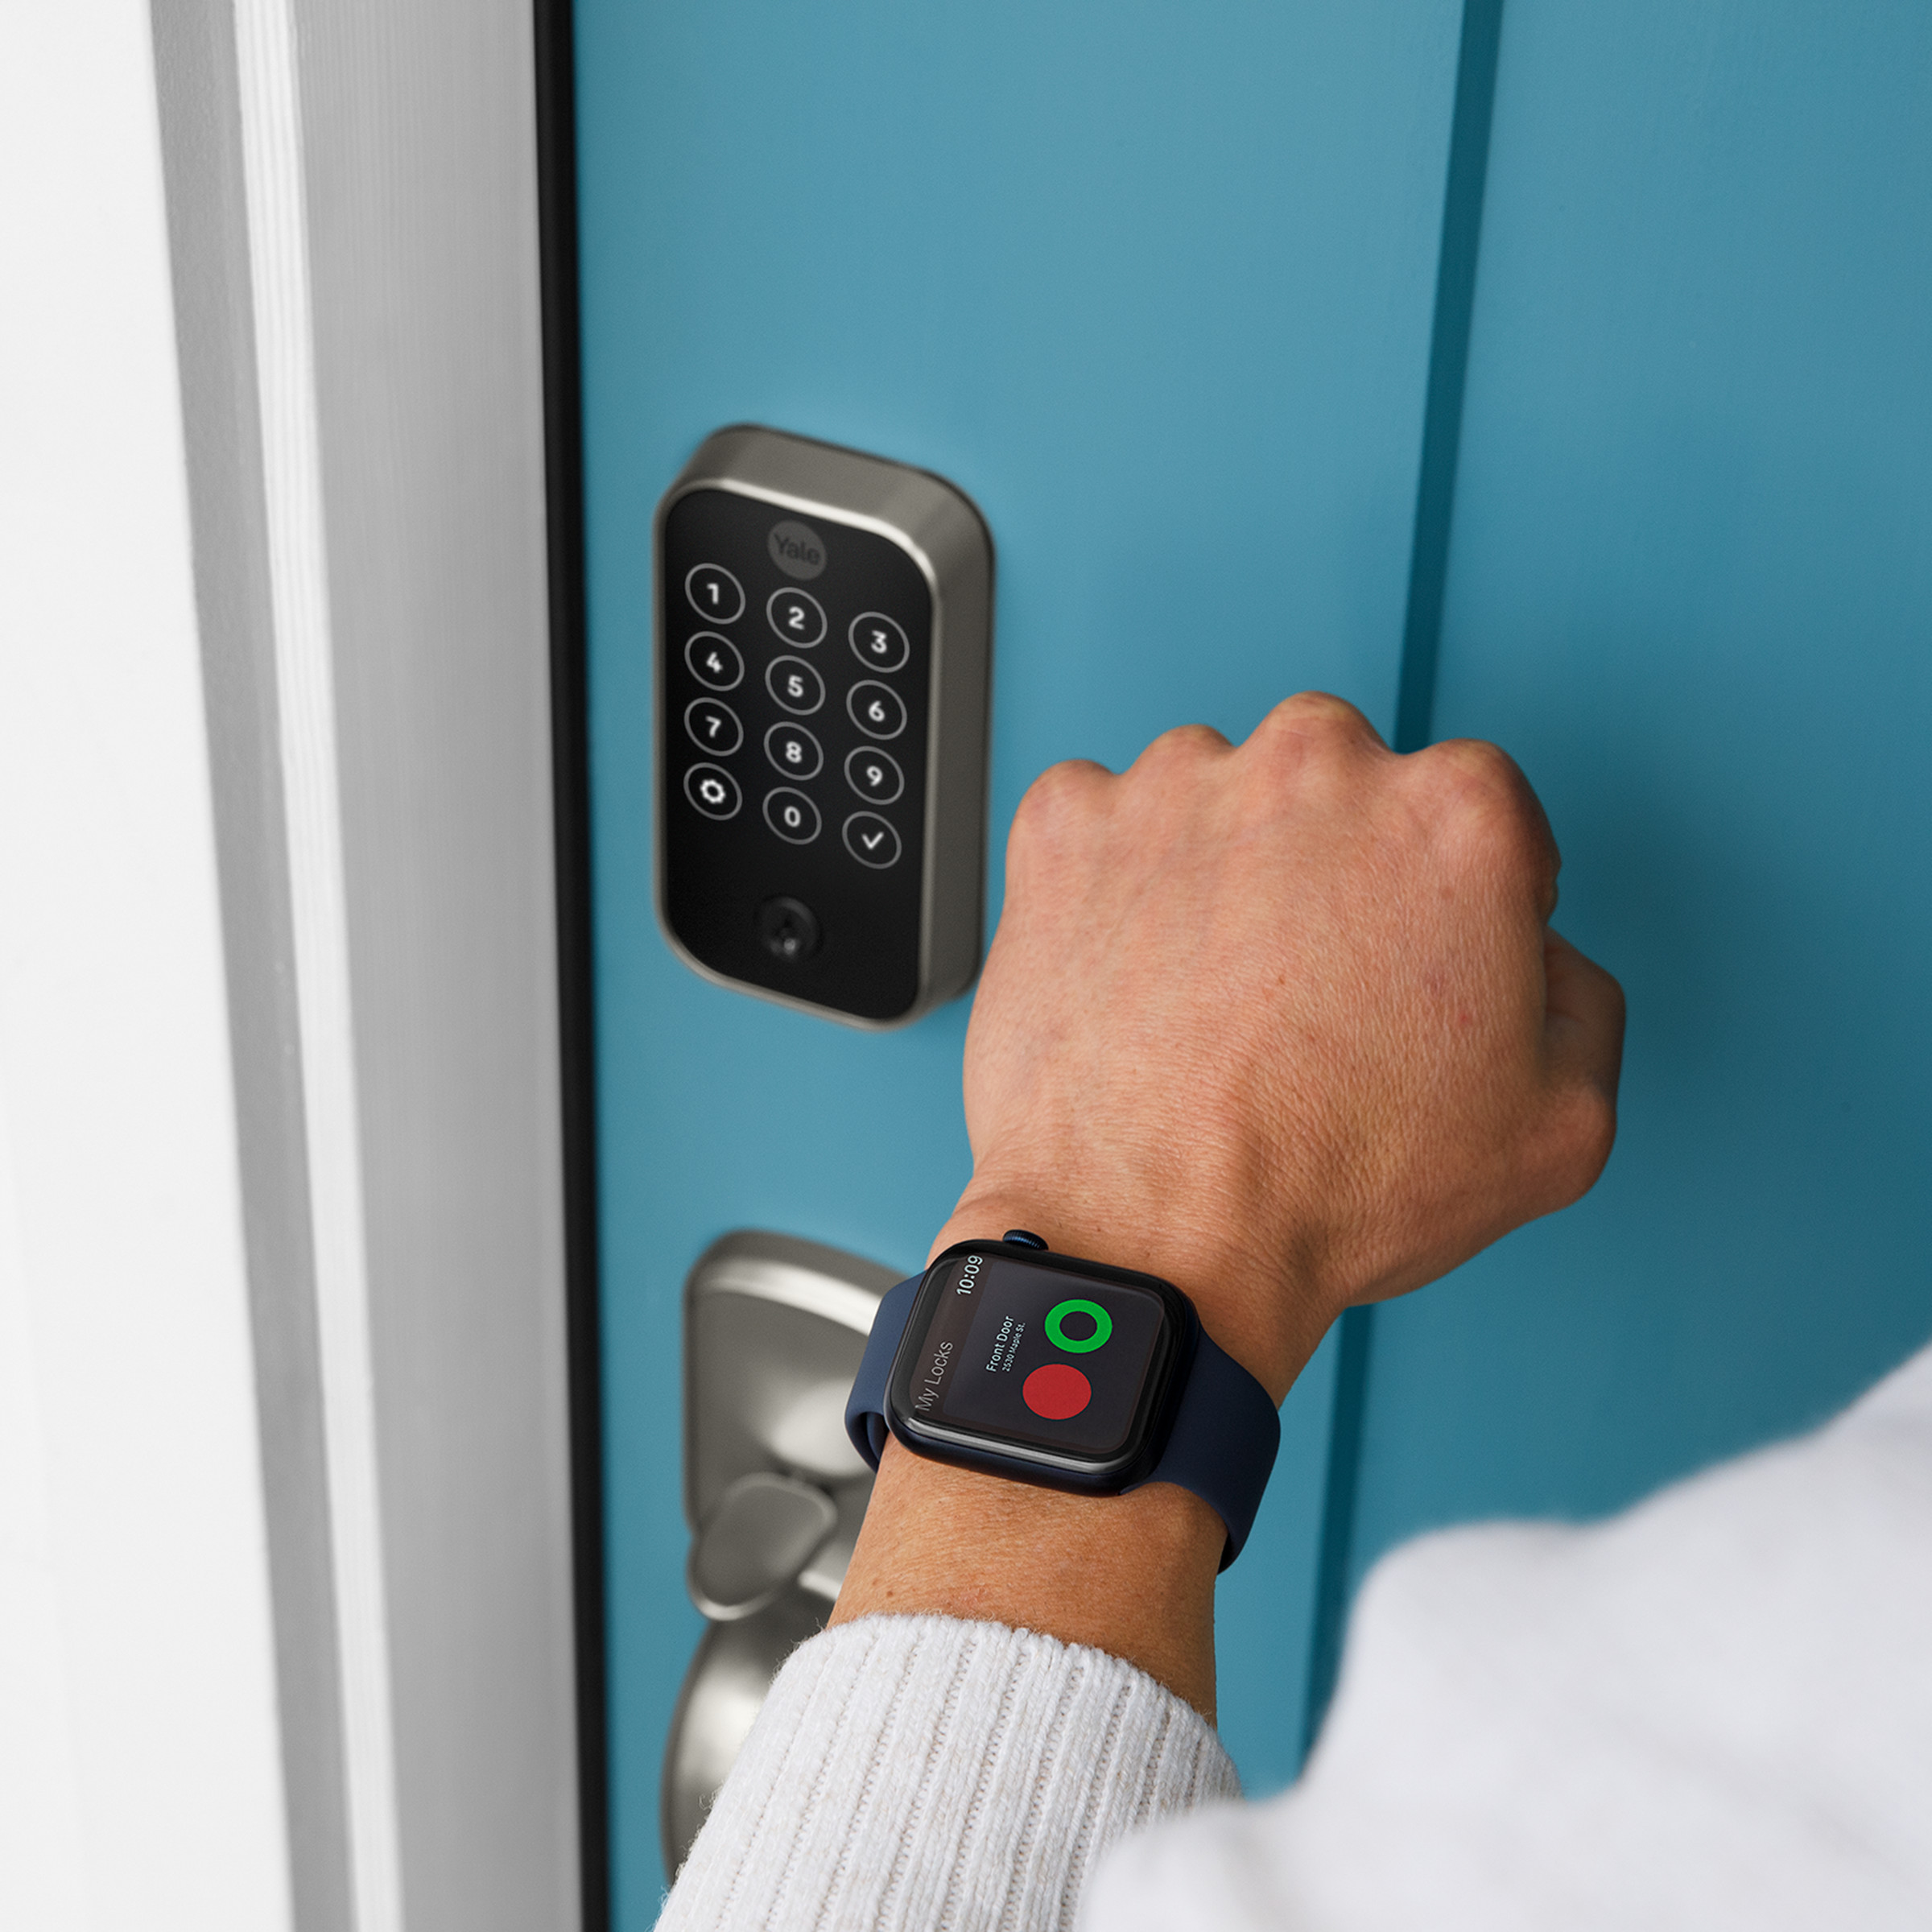 You can unlock the new Assure locks with an Apple Watch over Bluetooth or Wi-Fi, but there’s no support for Apple Home Key.